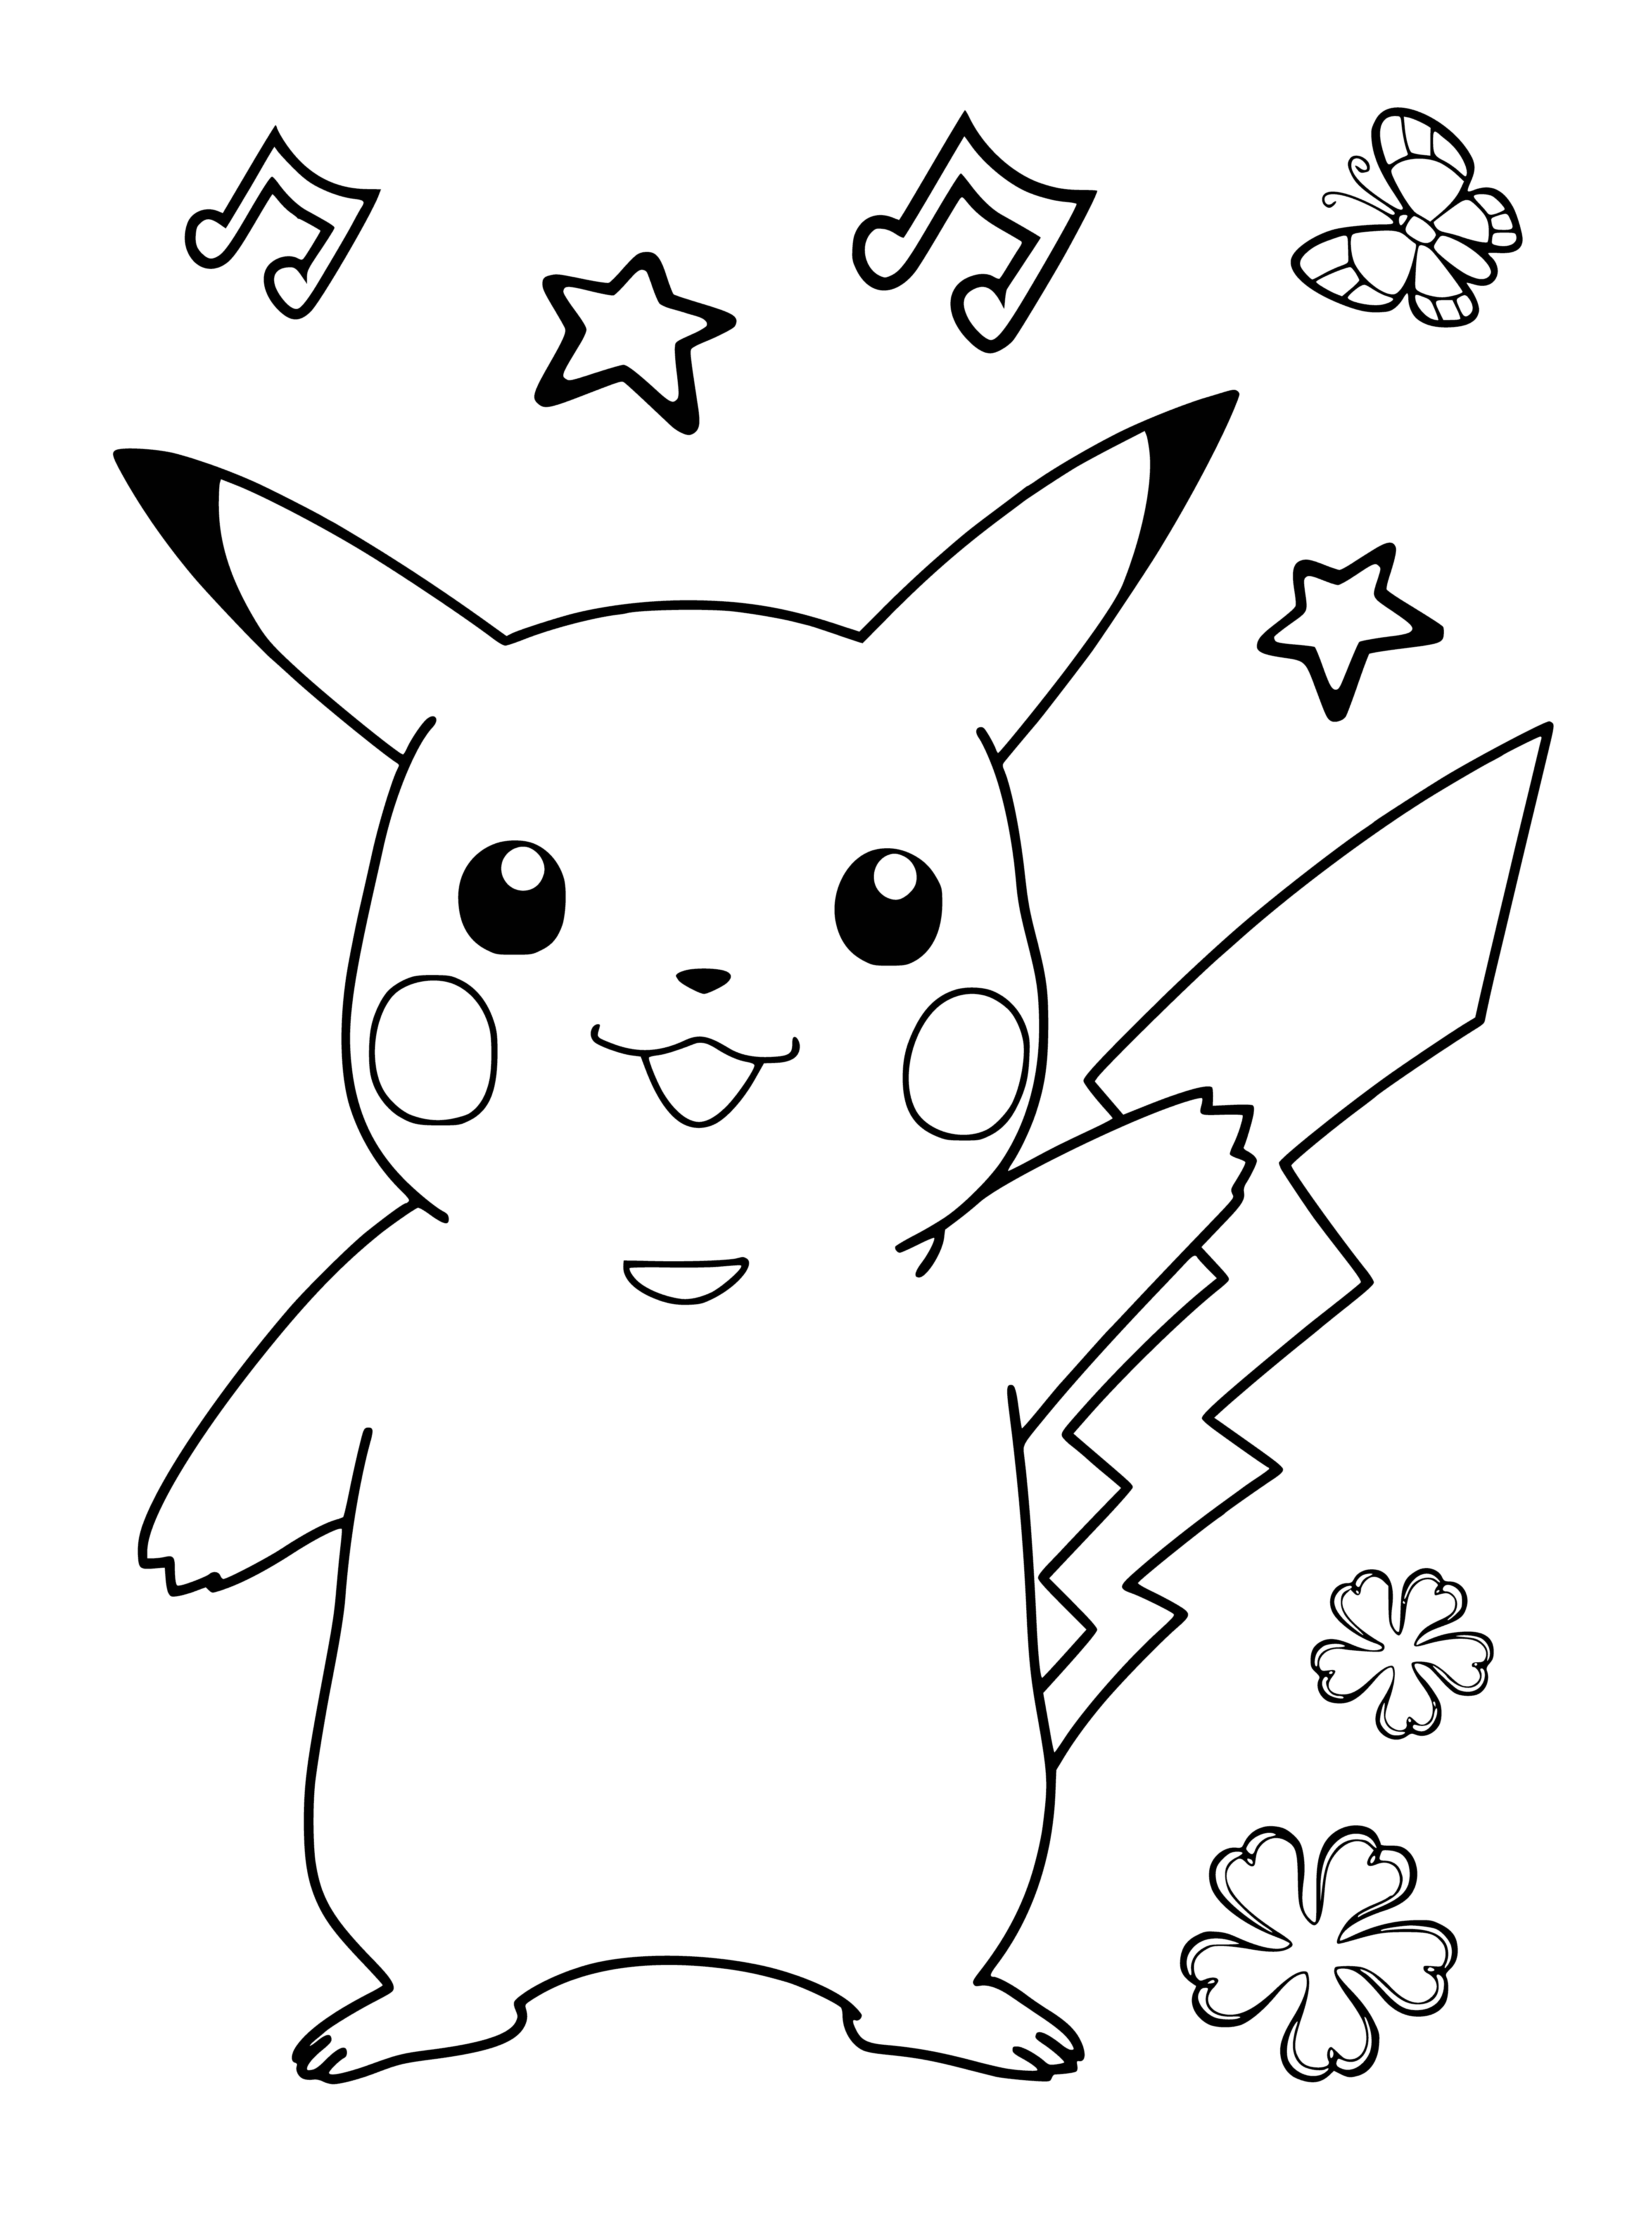 coloring page: Small, rodent-like Pokémon with yellow fur, brown stripes, a small tail, black eyes, long pointed ears & red circles on its cheeks, standing on 2 or hind legs.